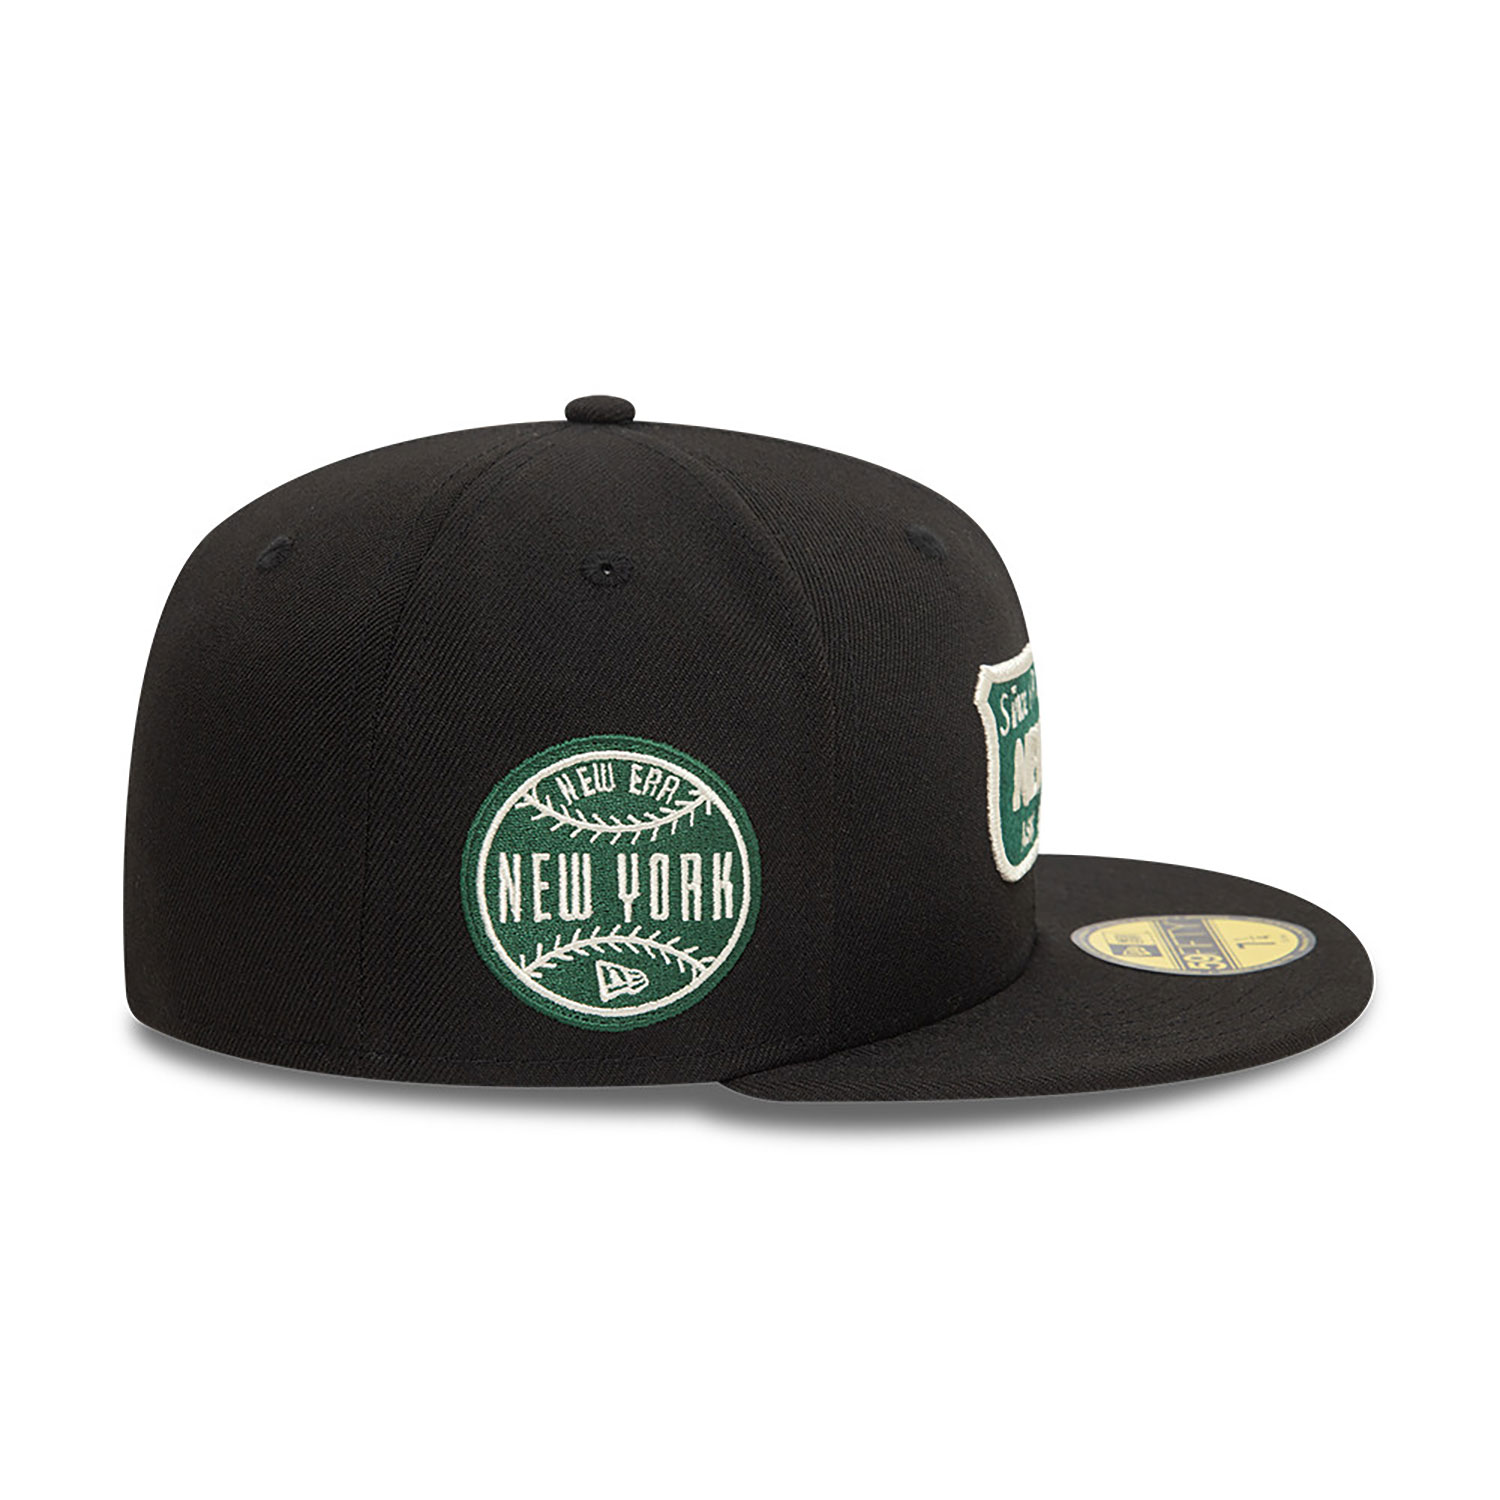 New Era Shield Black 59FIFTY Fitted Cap